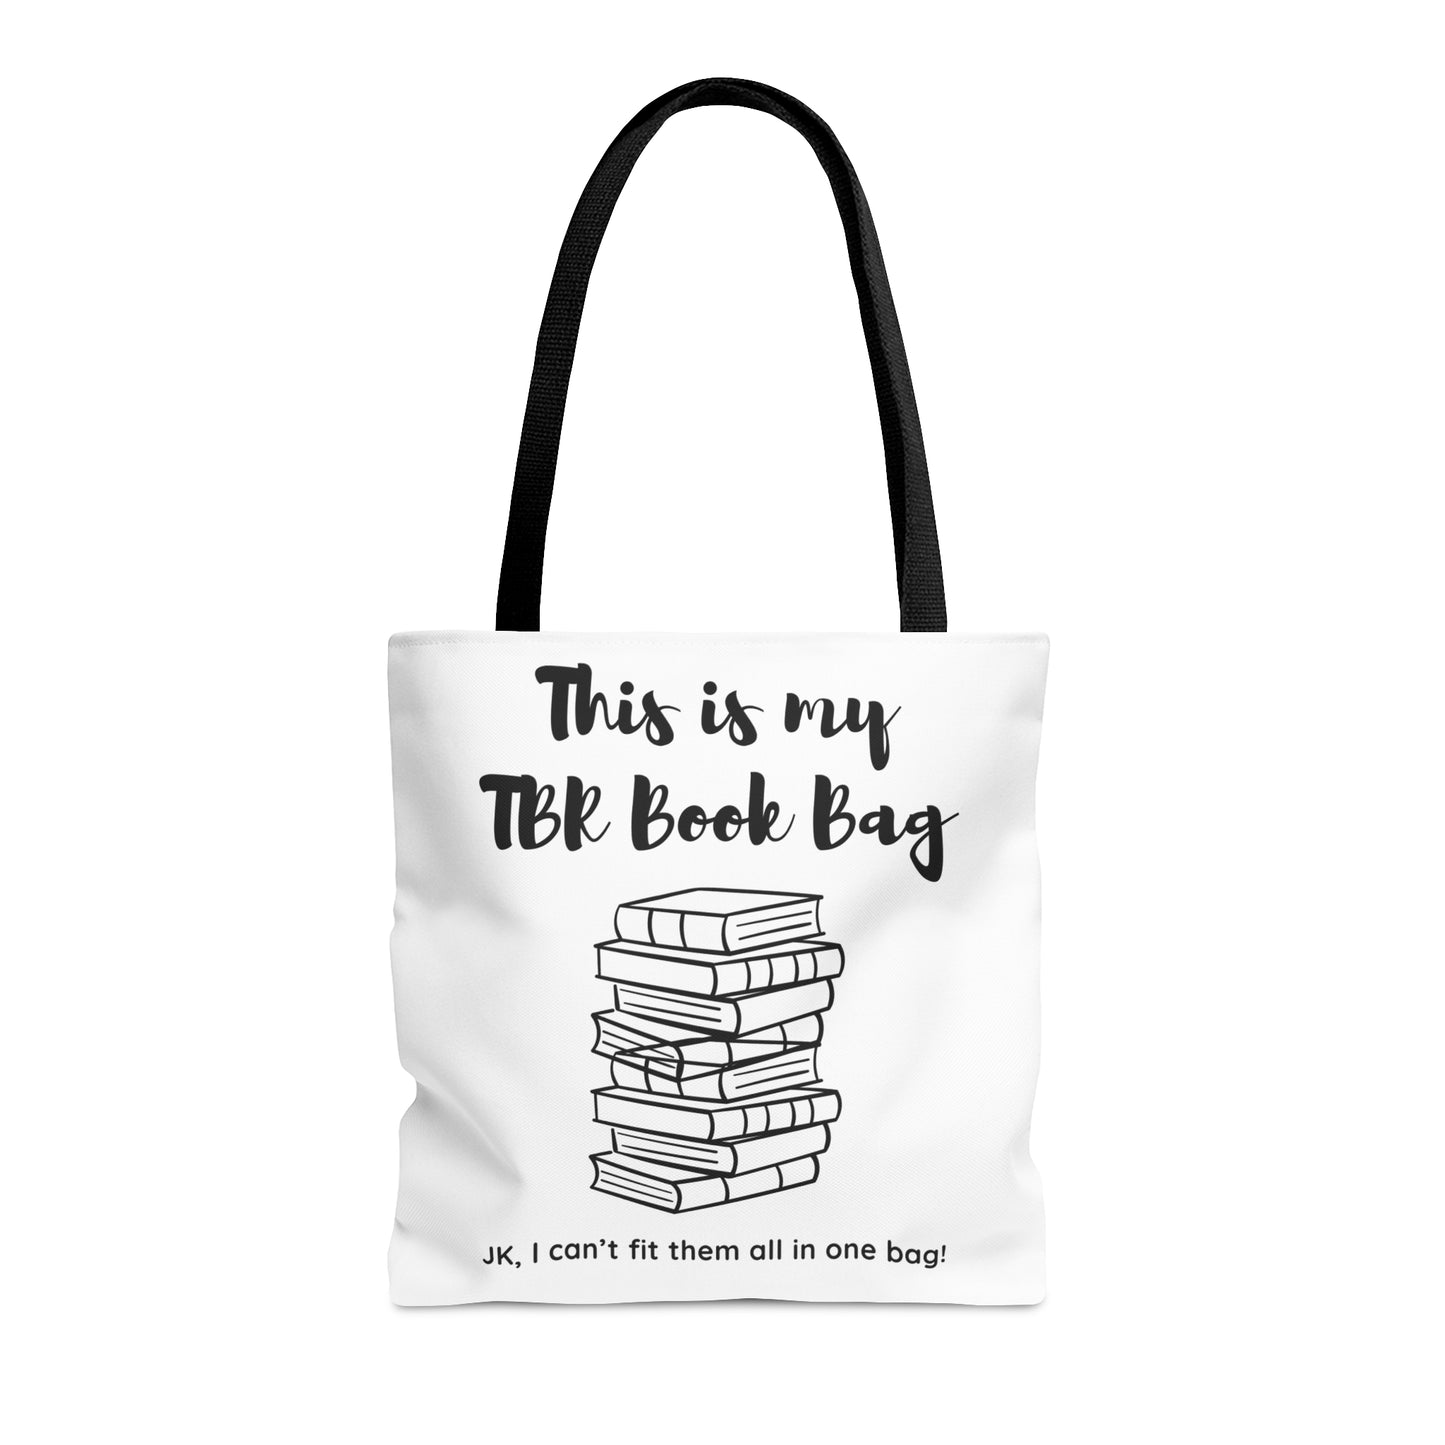 The TBR Tote Bag